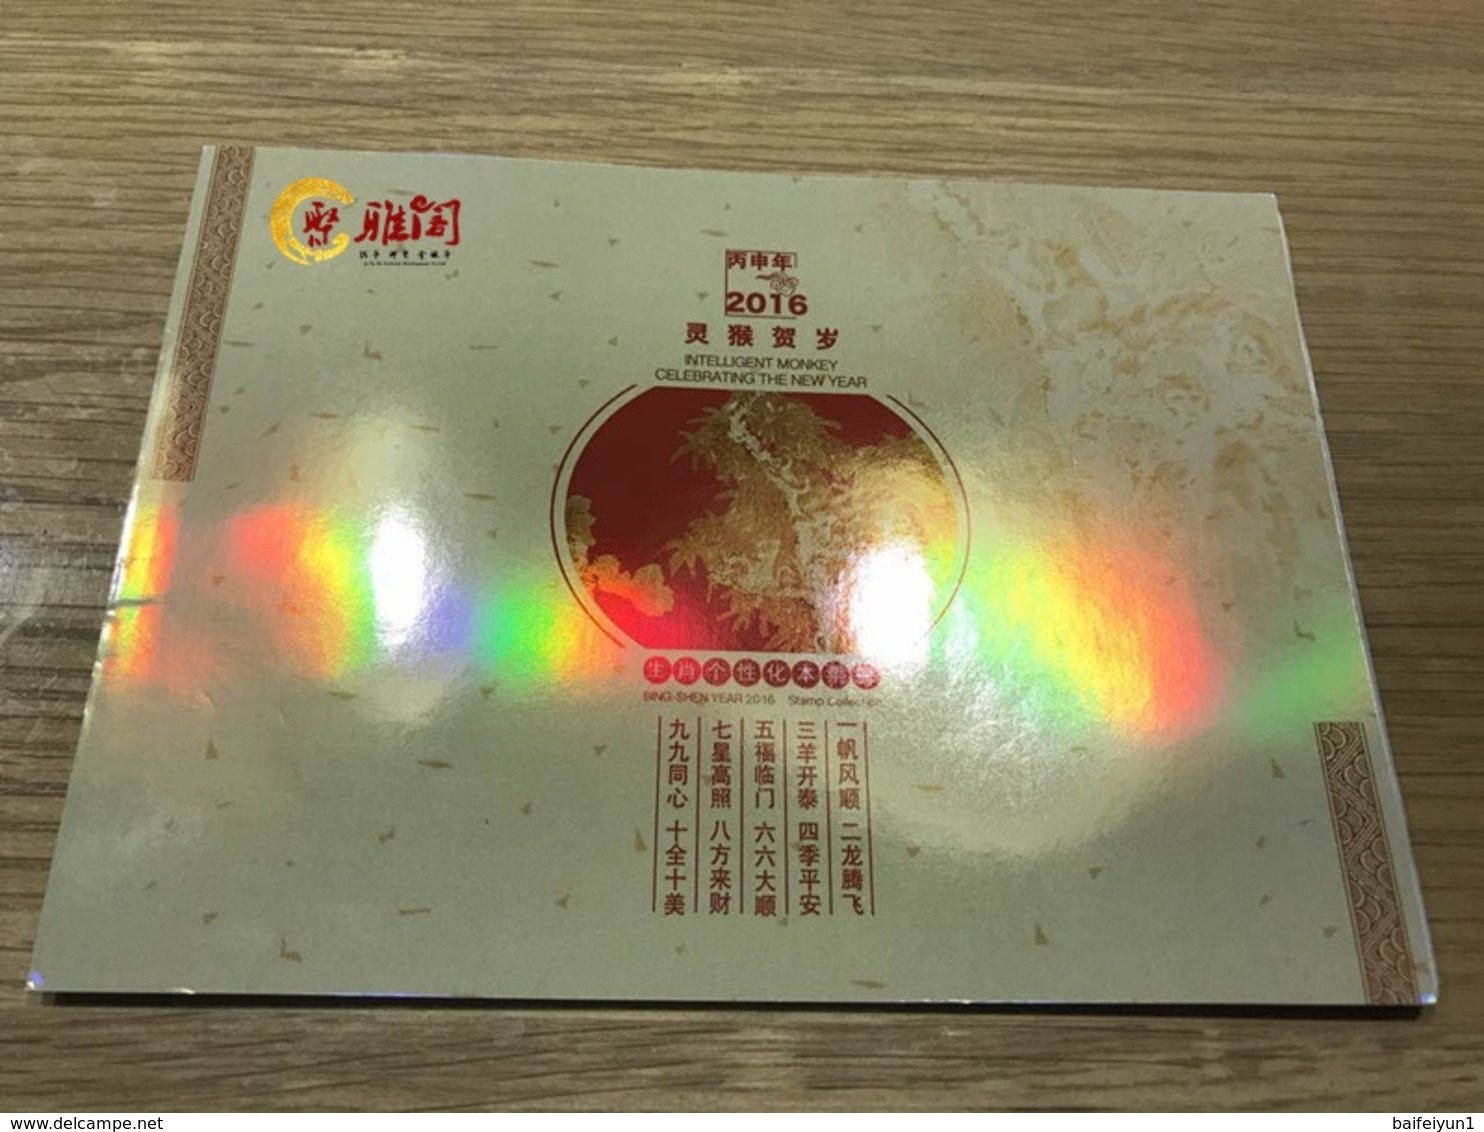 China 2016-1 Intelligent Monkey Celebrating The New Year Special S/S Booklet(Cover Is Holographic) - Holograms